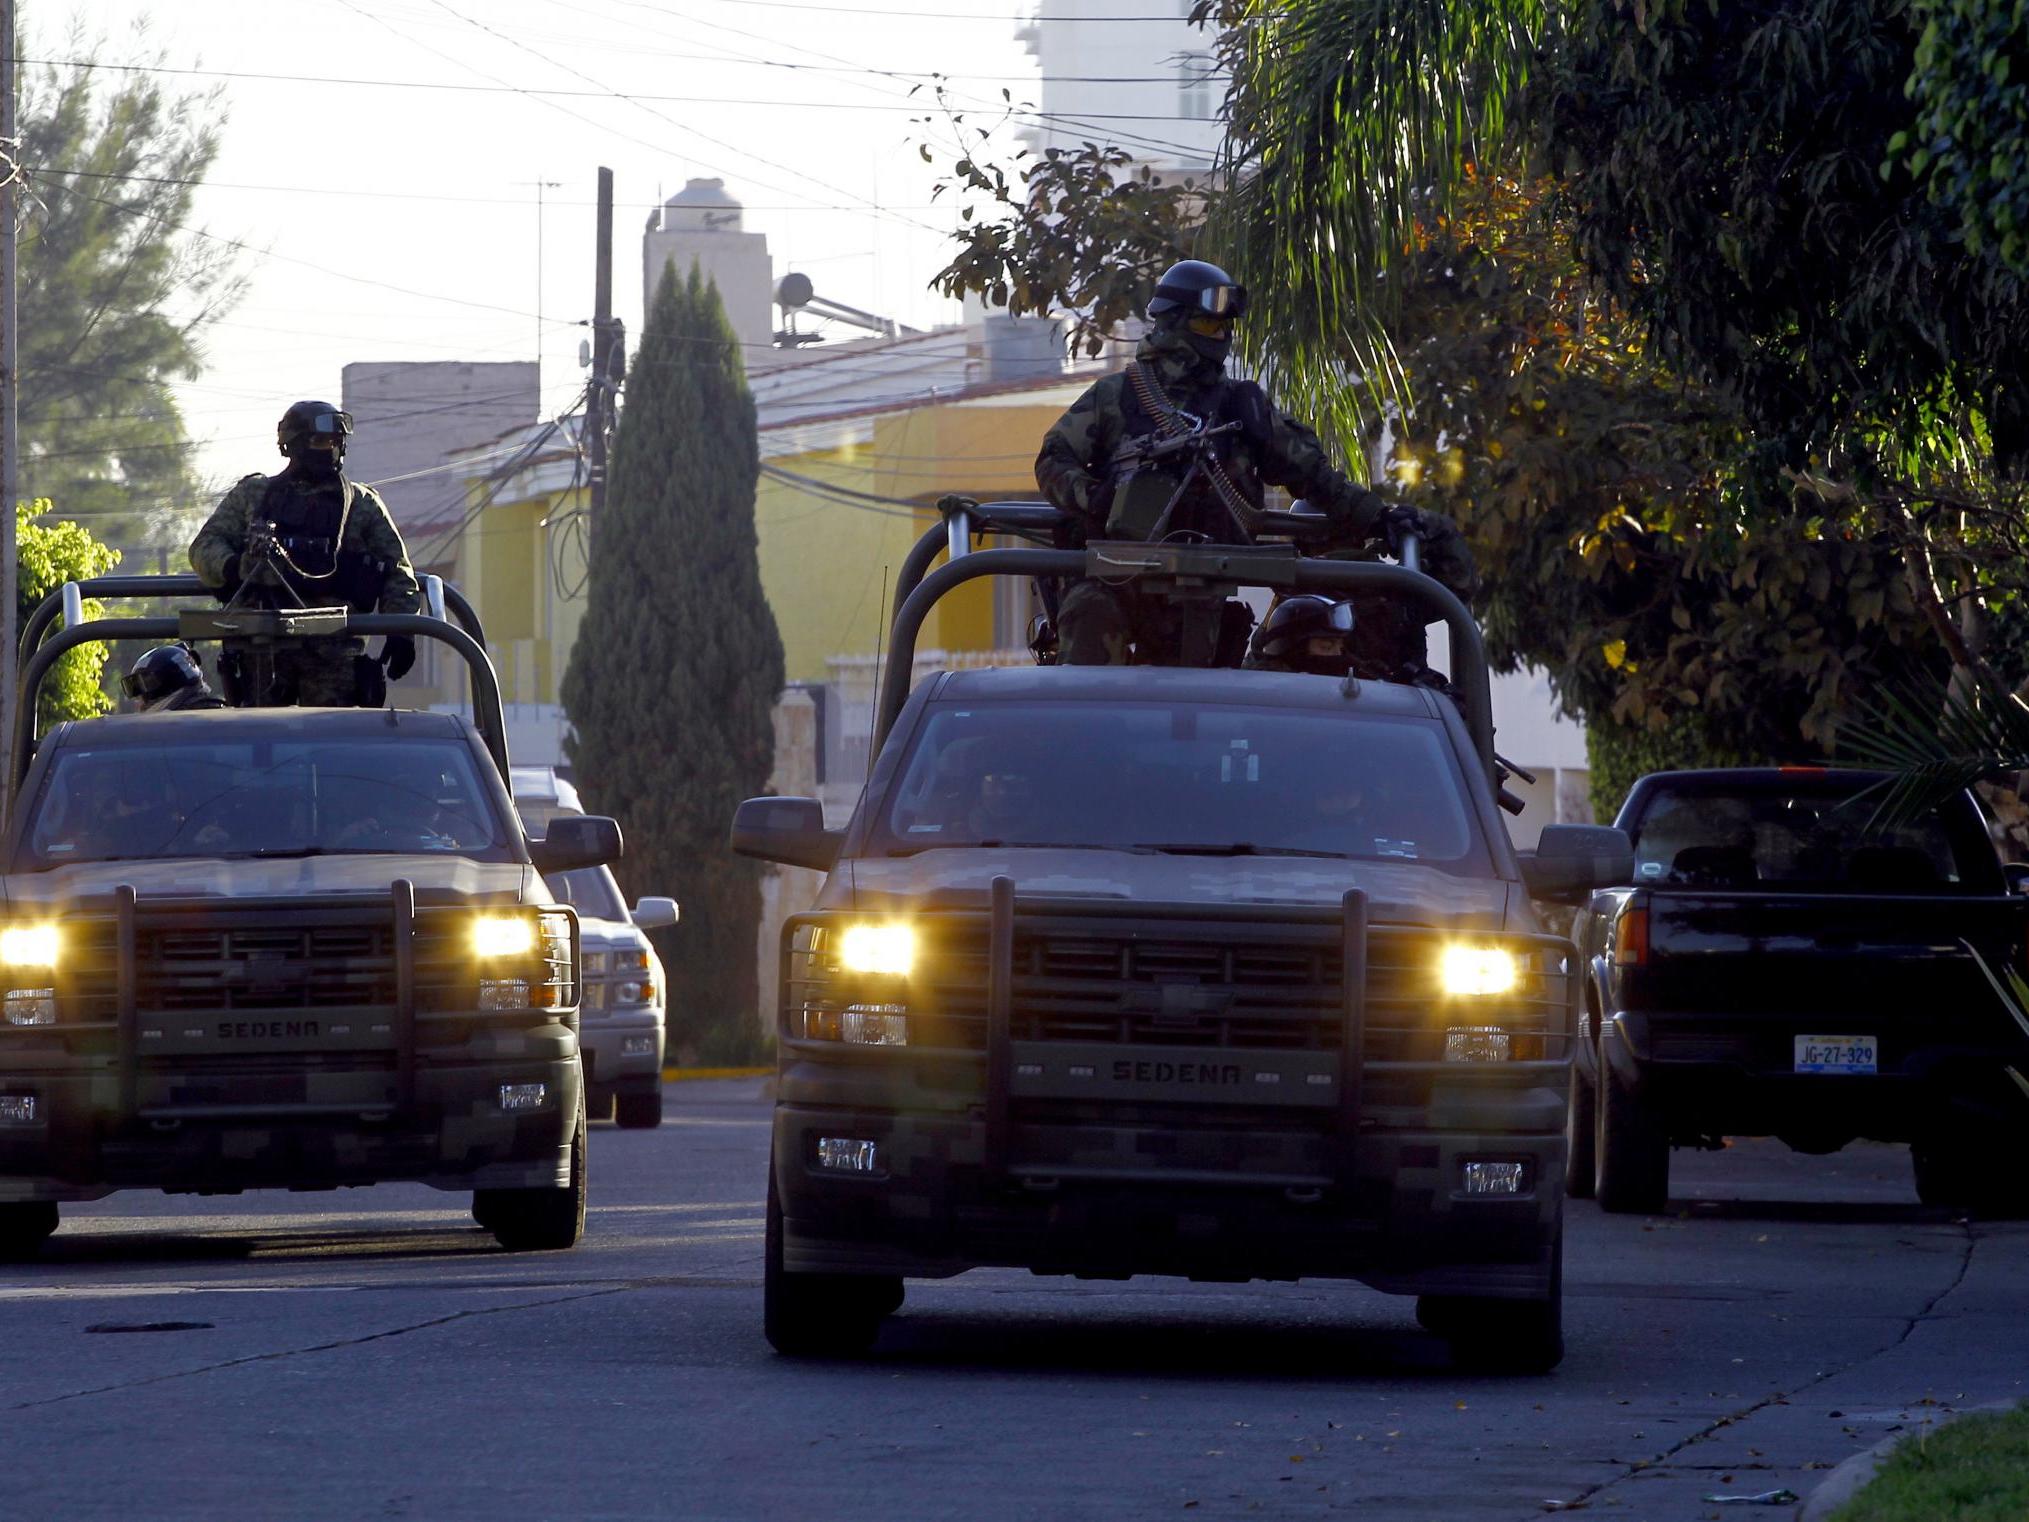 Mexican soldiers patrol the Jardines Universidad zone during a military operation during which Ruben Oseguera Gonzalez, aka "el Menchito" son of the leader of the Jalisco next Generation cartel, was then arrested, in Guadalajara, Mexico on 30 January 2014